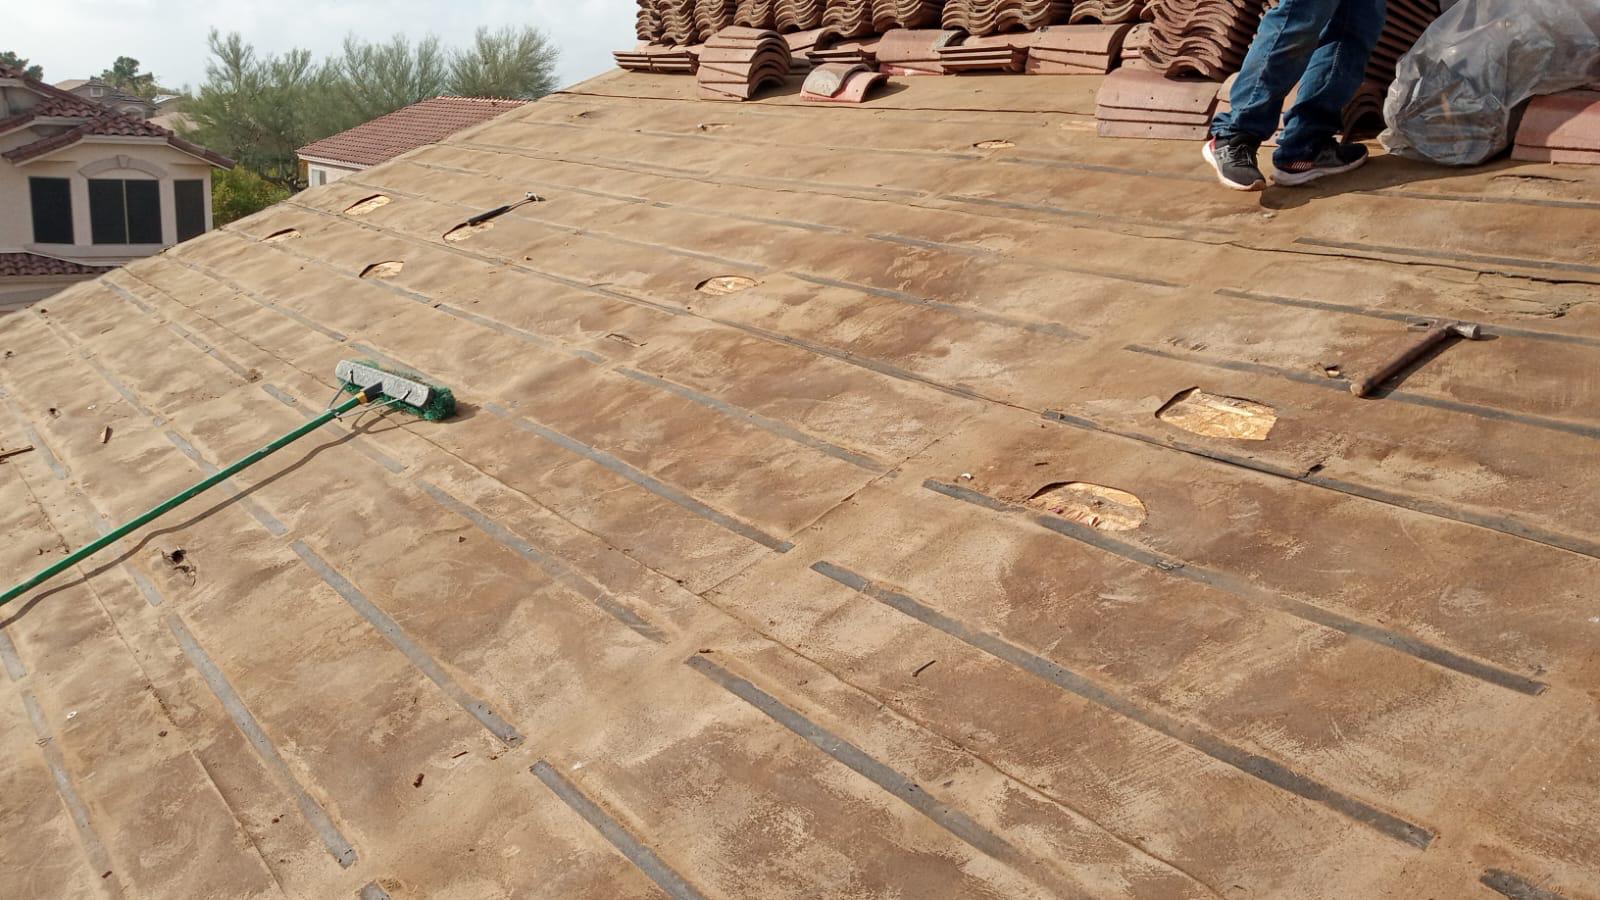 Behmer roofing specialists in the process of a tile re-felt in the Biltmore Area.